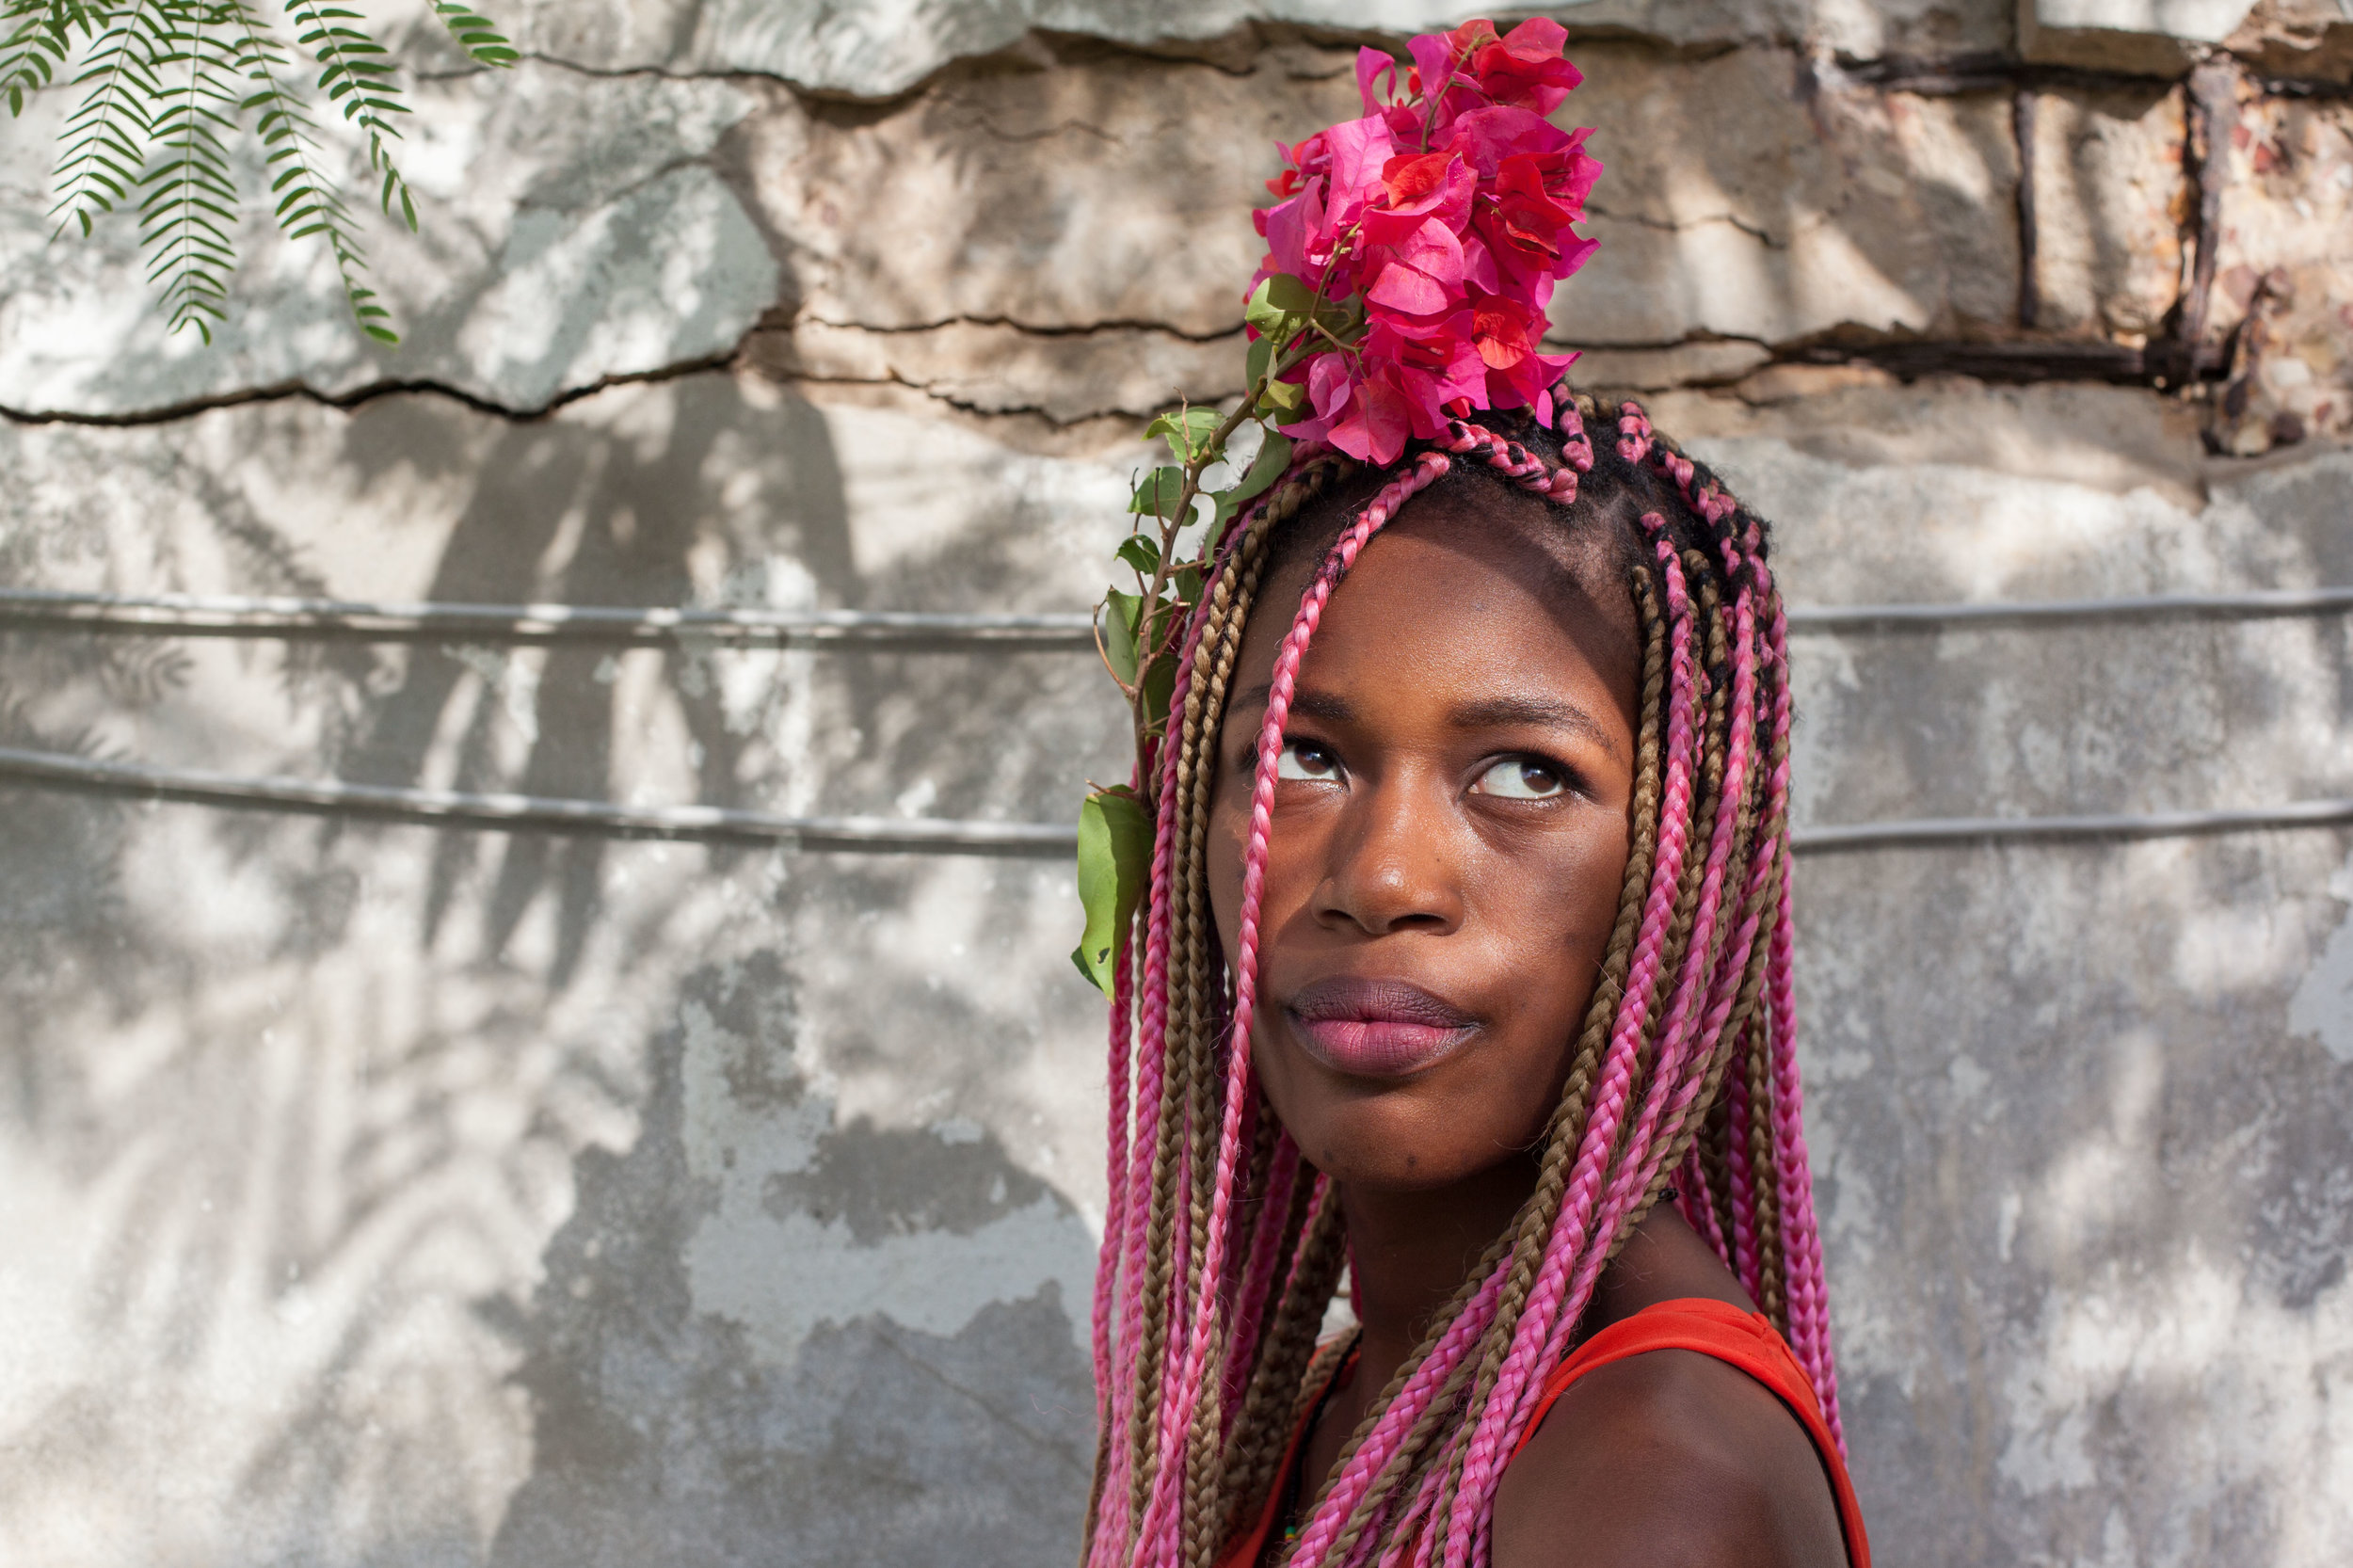 A Senegalese woman poses for a photo with flowers in her hair.